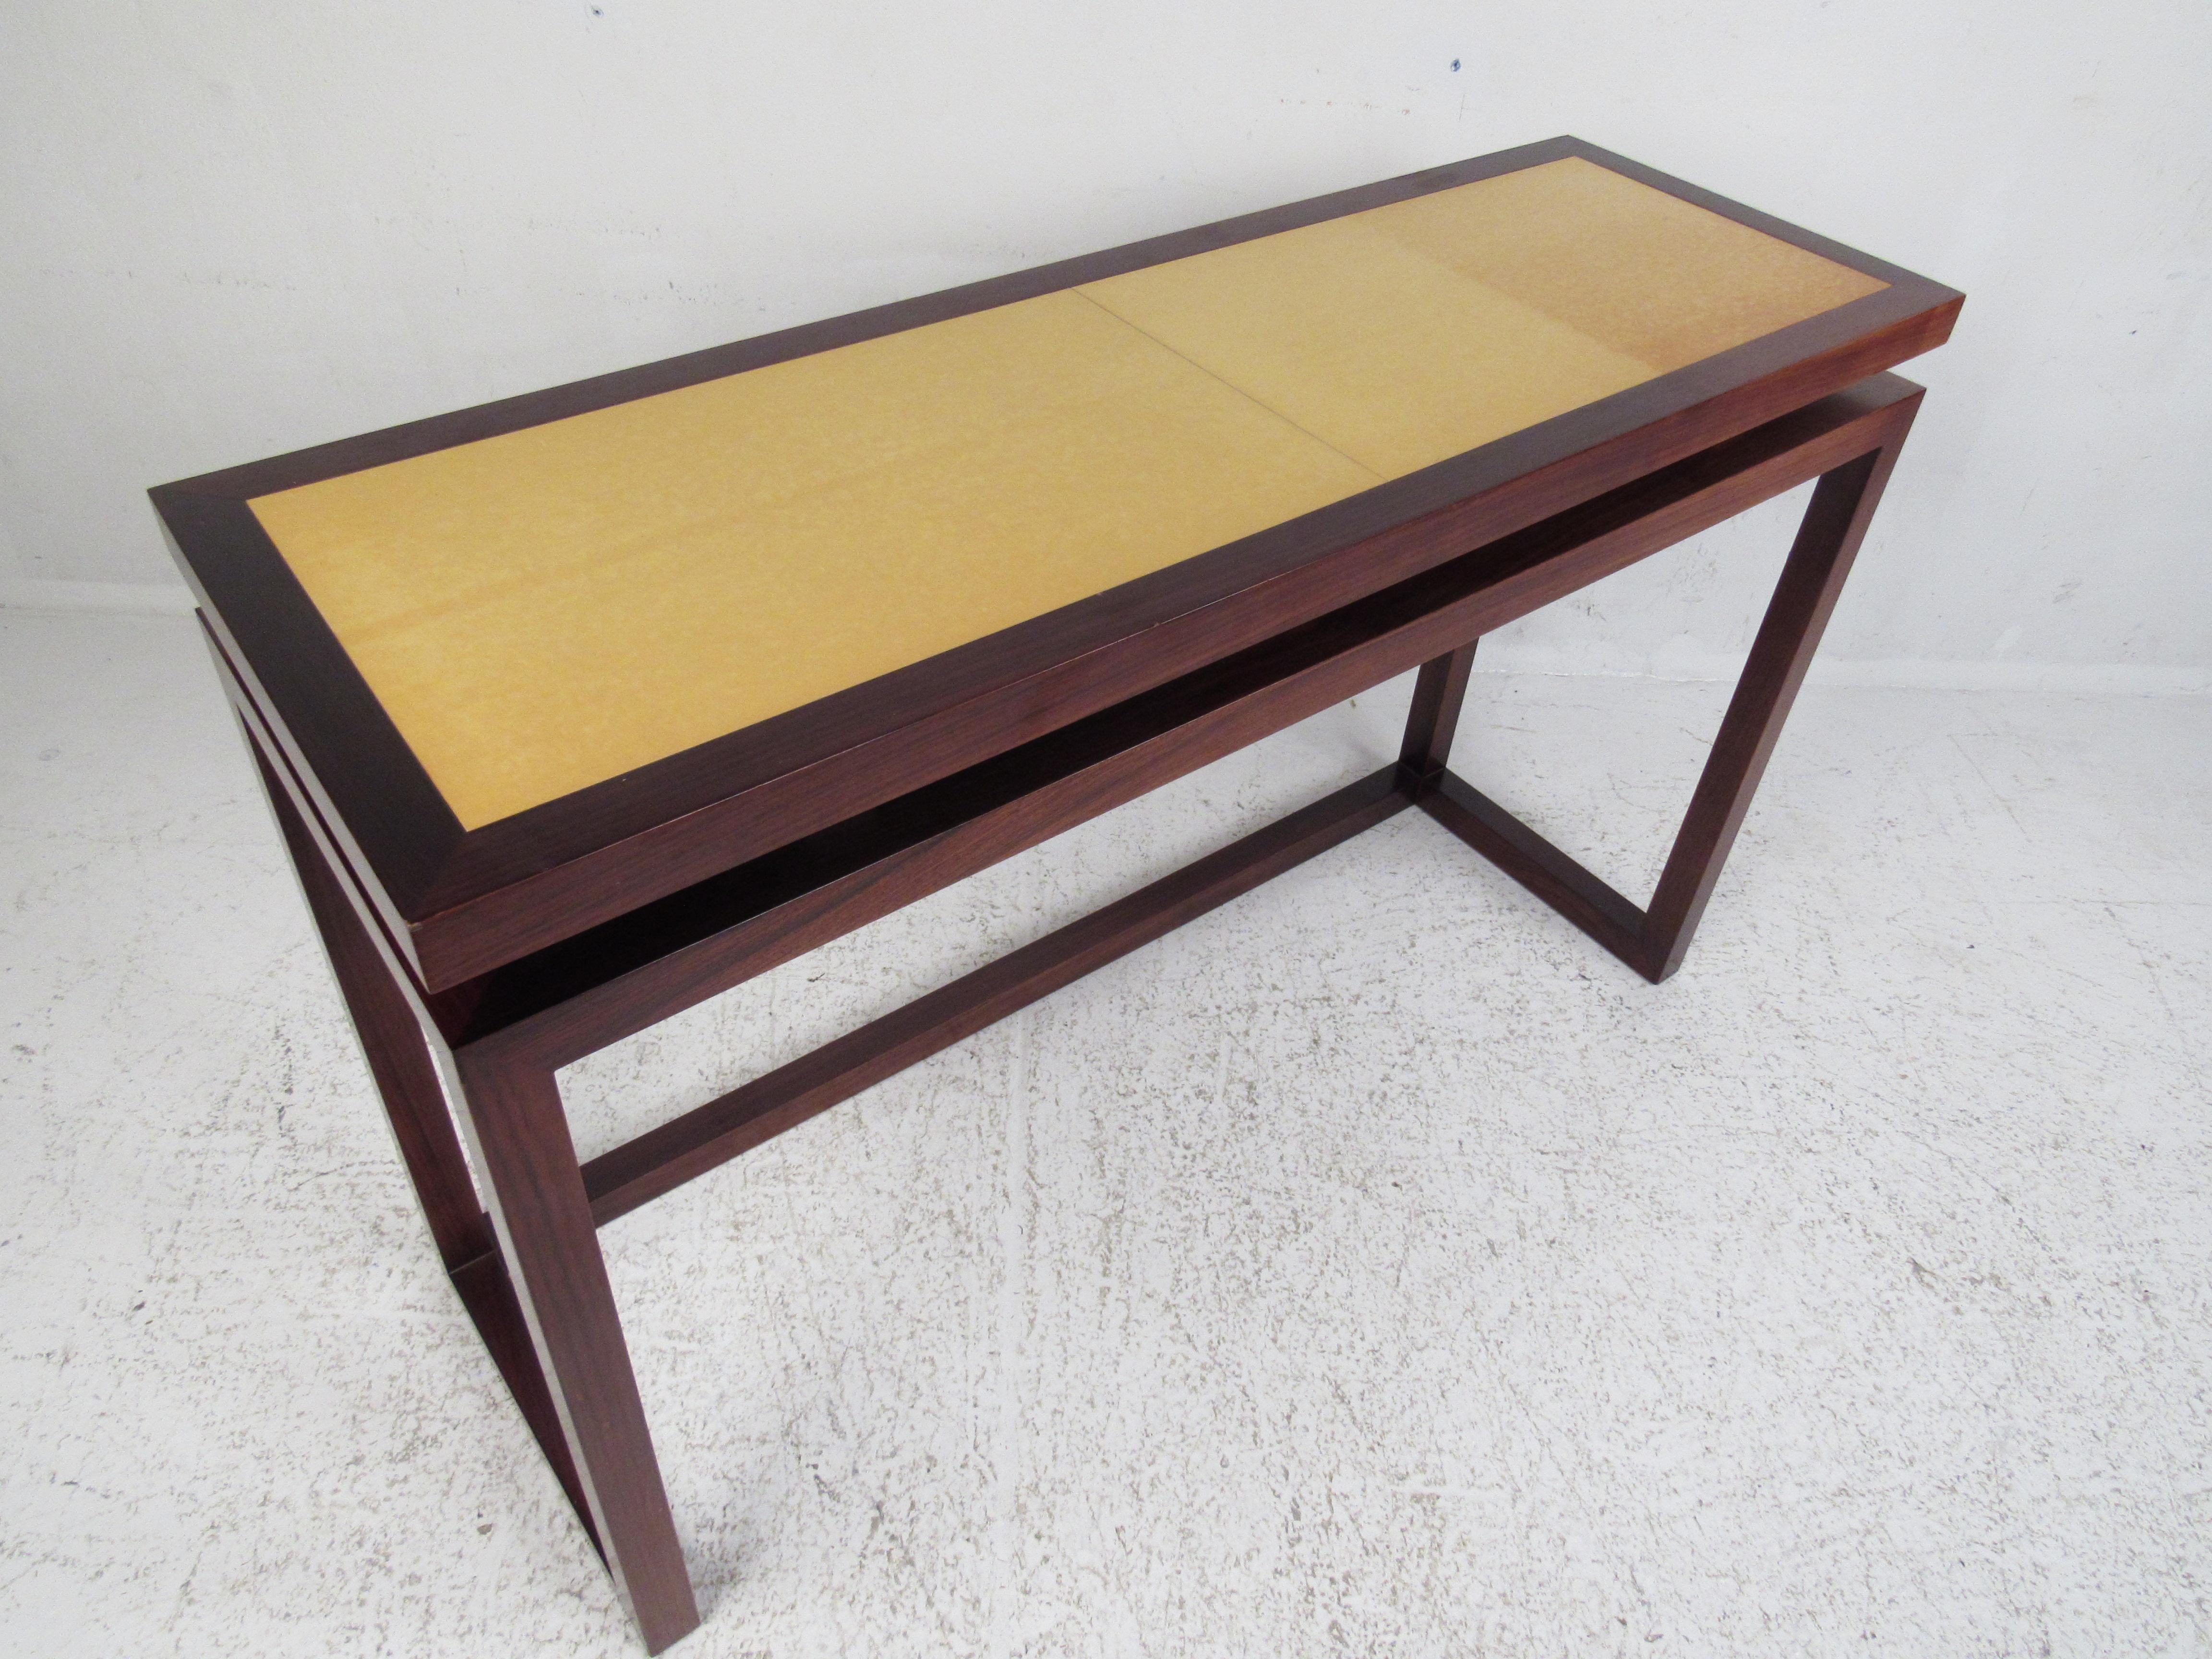 A stunning vintage modern sofa table with a raised top and a rosewood frame. The Italian two-tone design looks great in any entryway, hallway, or even behind the sofa. A sleek console table for the home, business, or office. Please confirm item